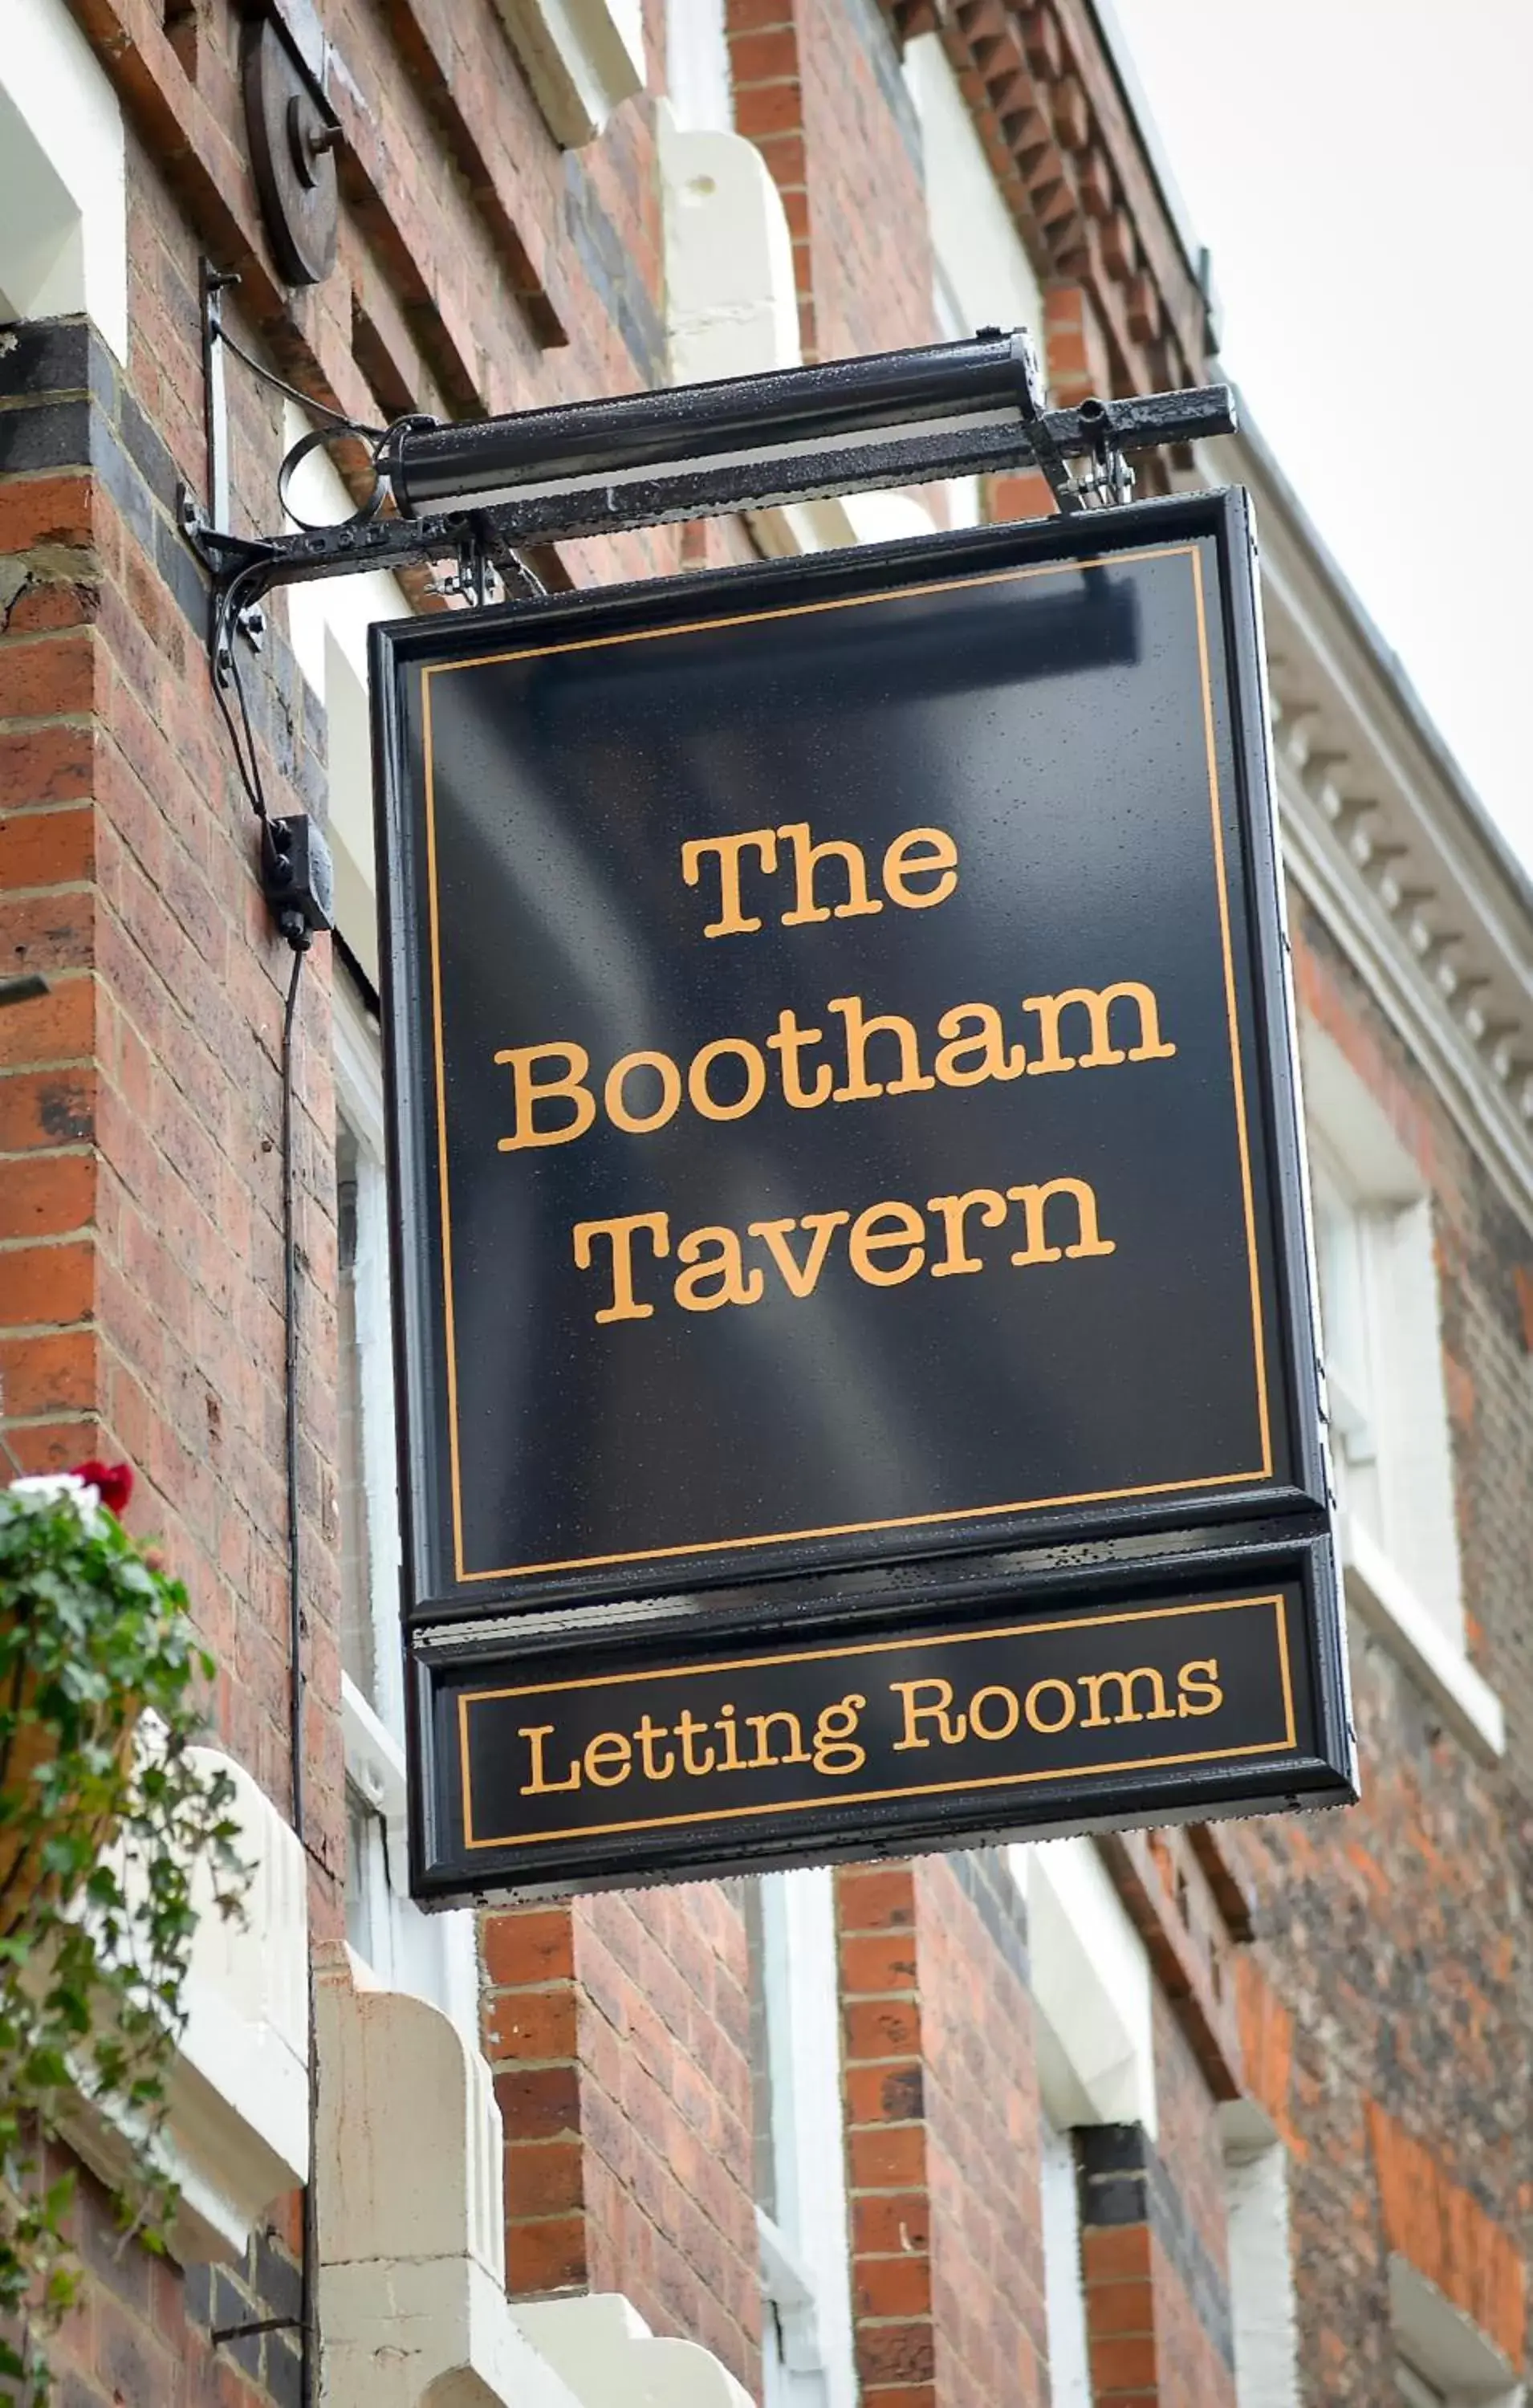 Property building in The Bootham Tavern - York